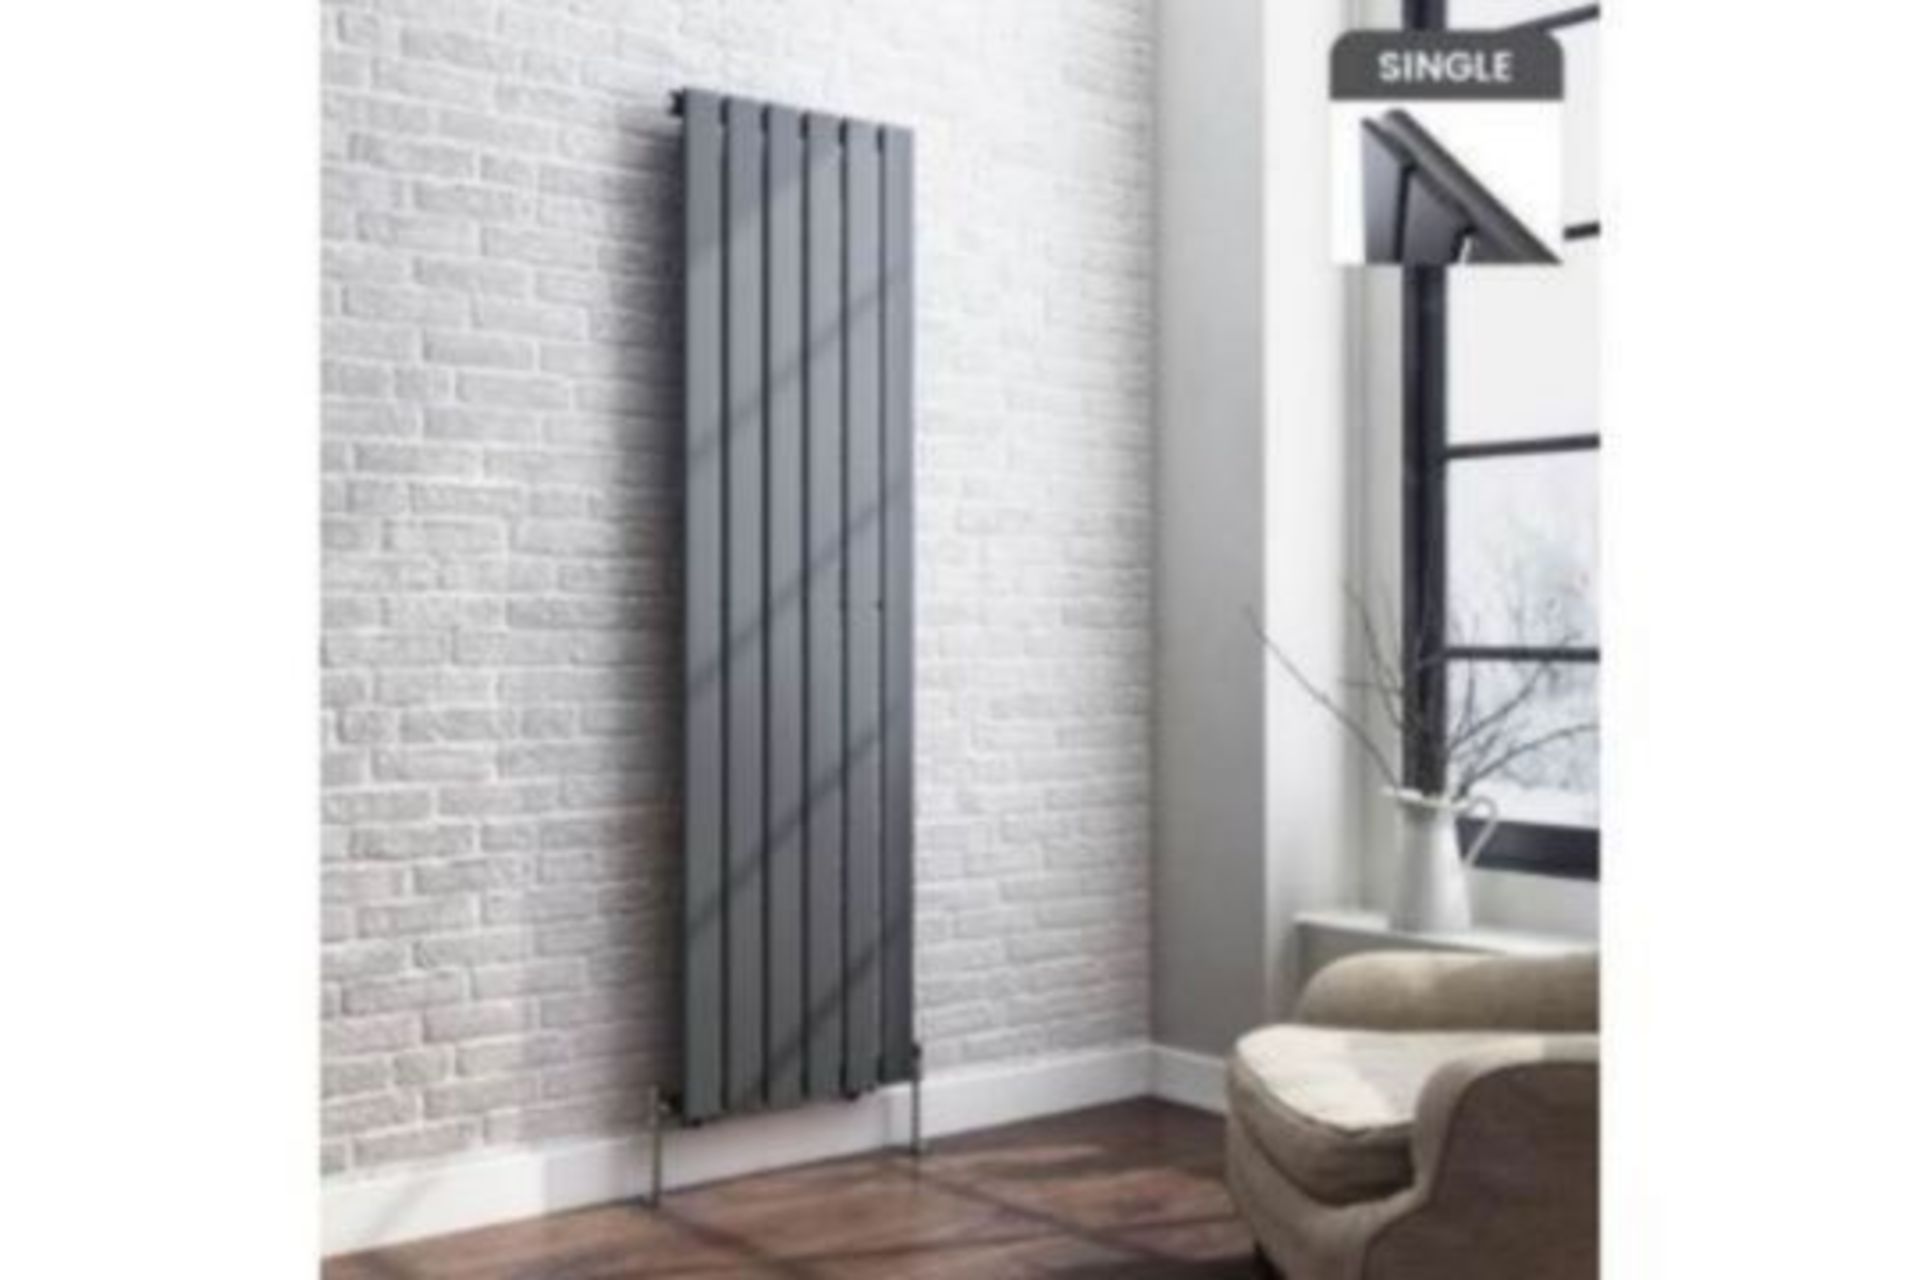 New & Boxed 1600x452mm Anthracite Single Flat Panel Vertical Radiator. Rc209.RRP £307.99 Each...ÊNew